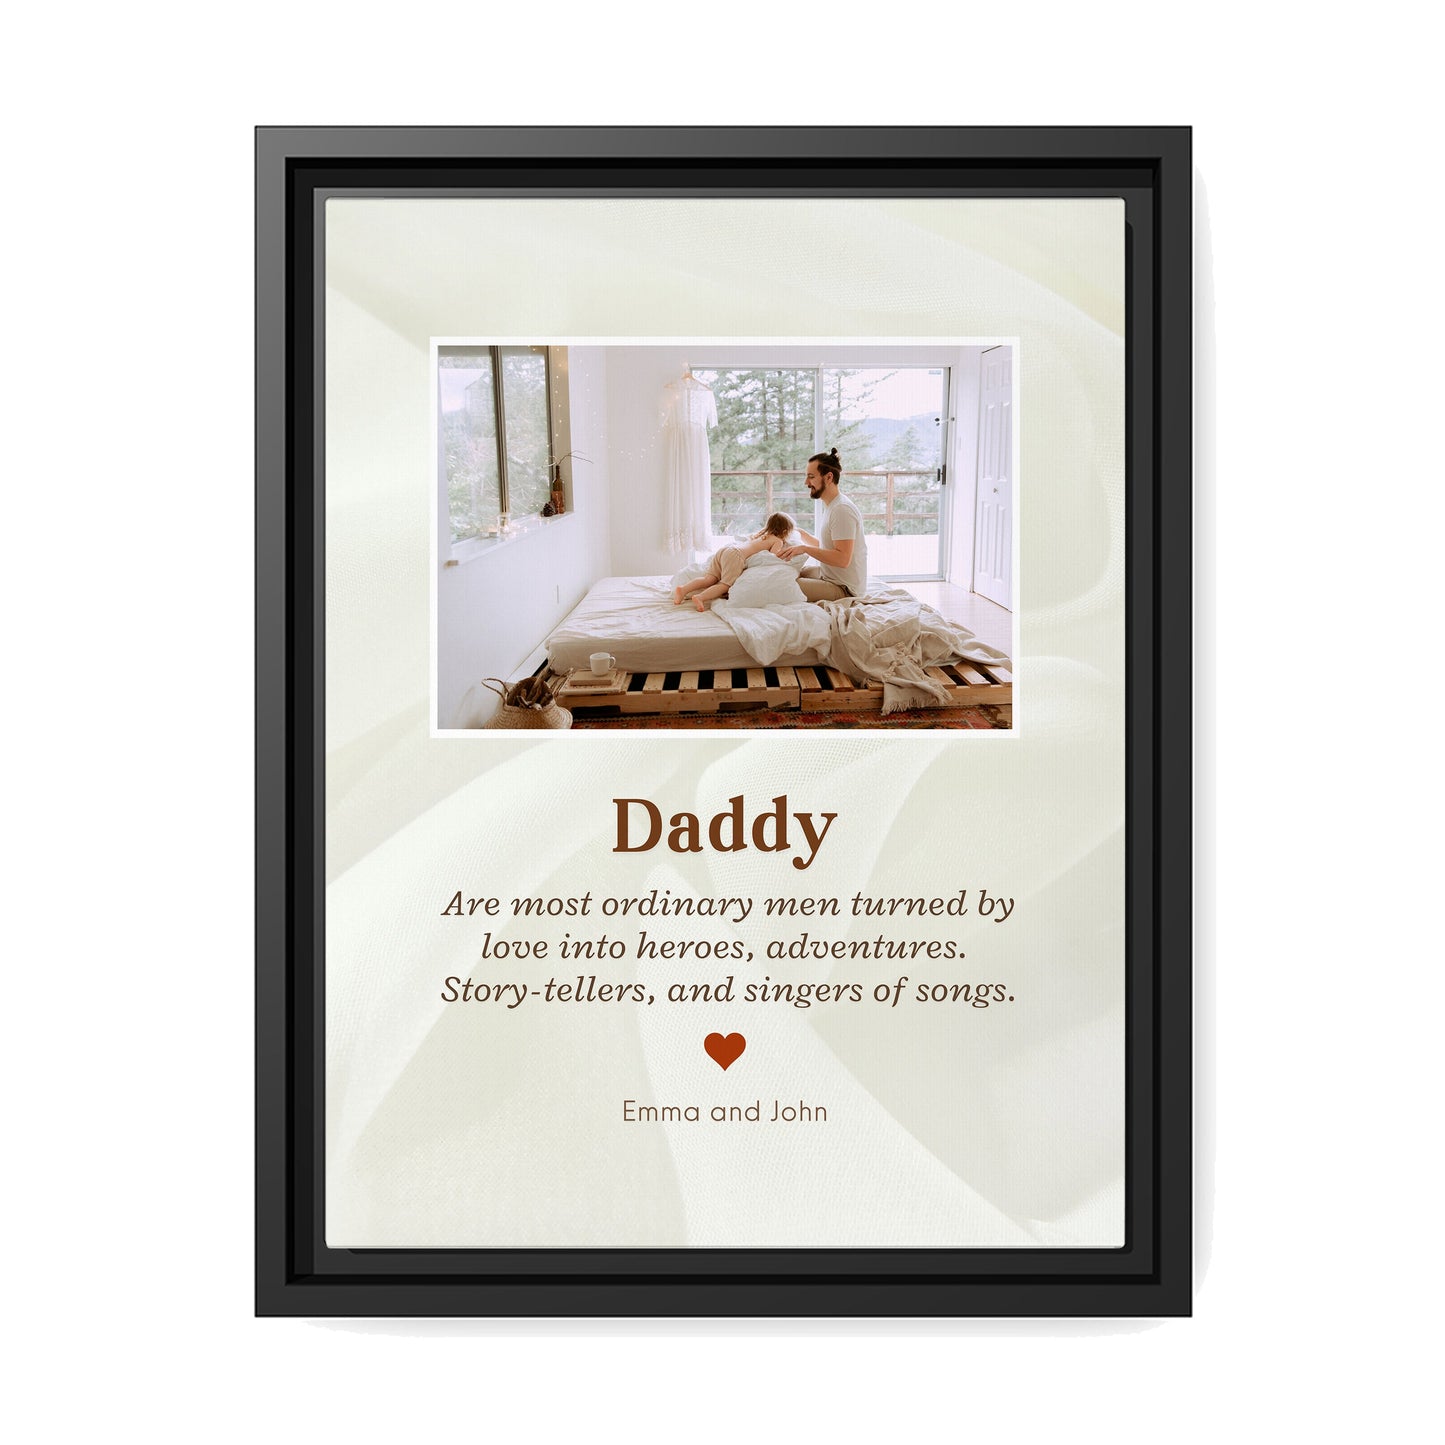 Are most ordinary men turned by love into heroes - Personalized Father's Day or Birthday gift for Dad - Custom Canvas Print - MyMindfulGifts